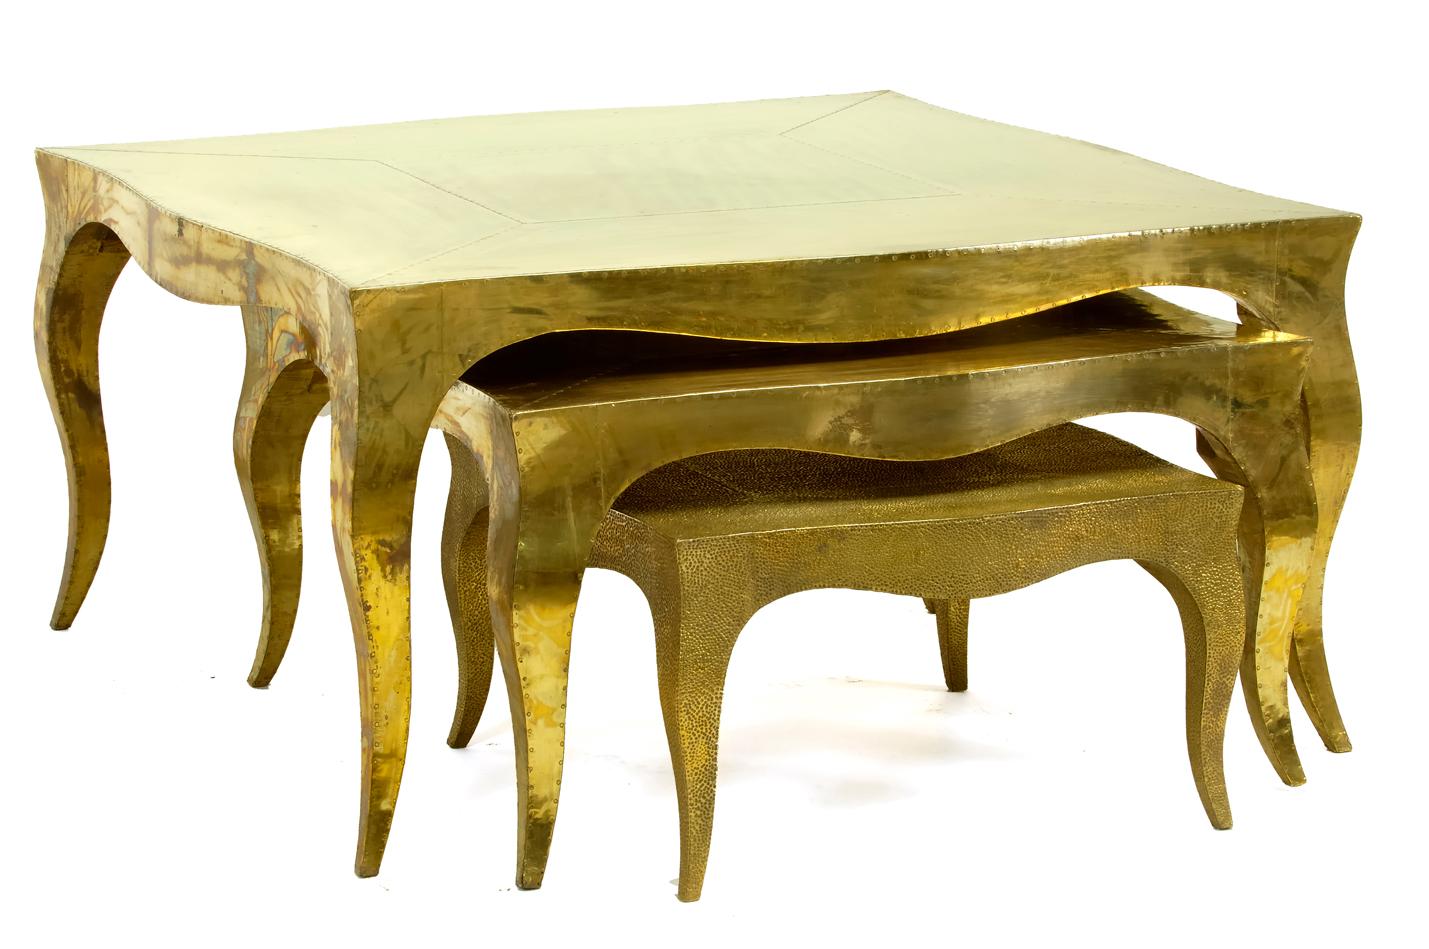 Louise Art Deco Nesting Tables Mid. Hammered Brass 18.5x18.5x10 inch by Paul M. For Sale 5